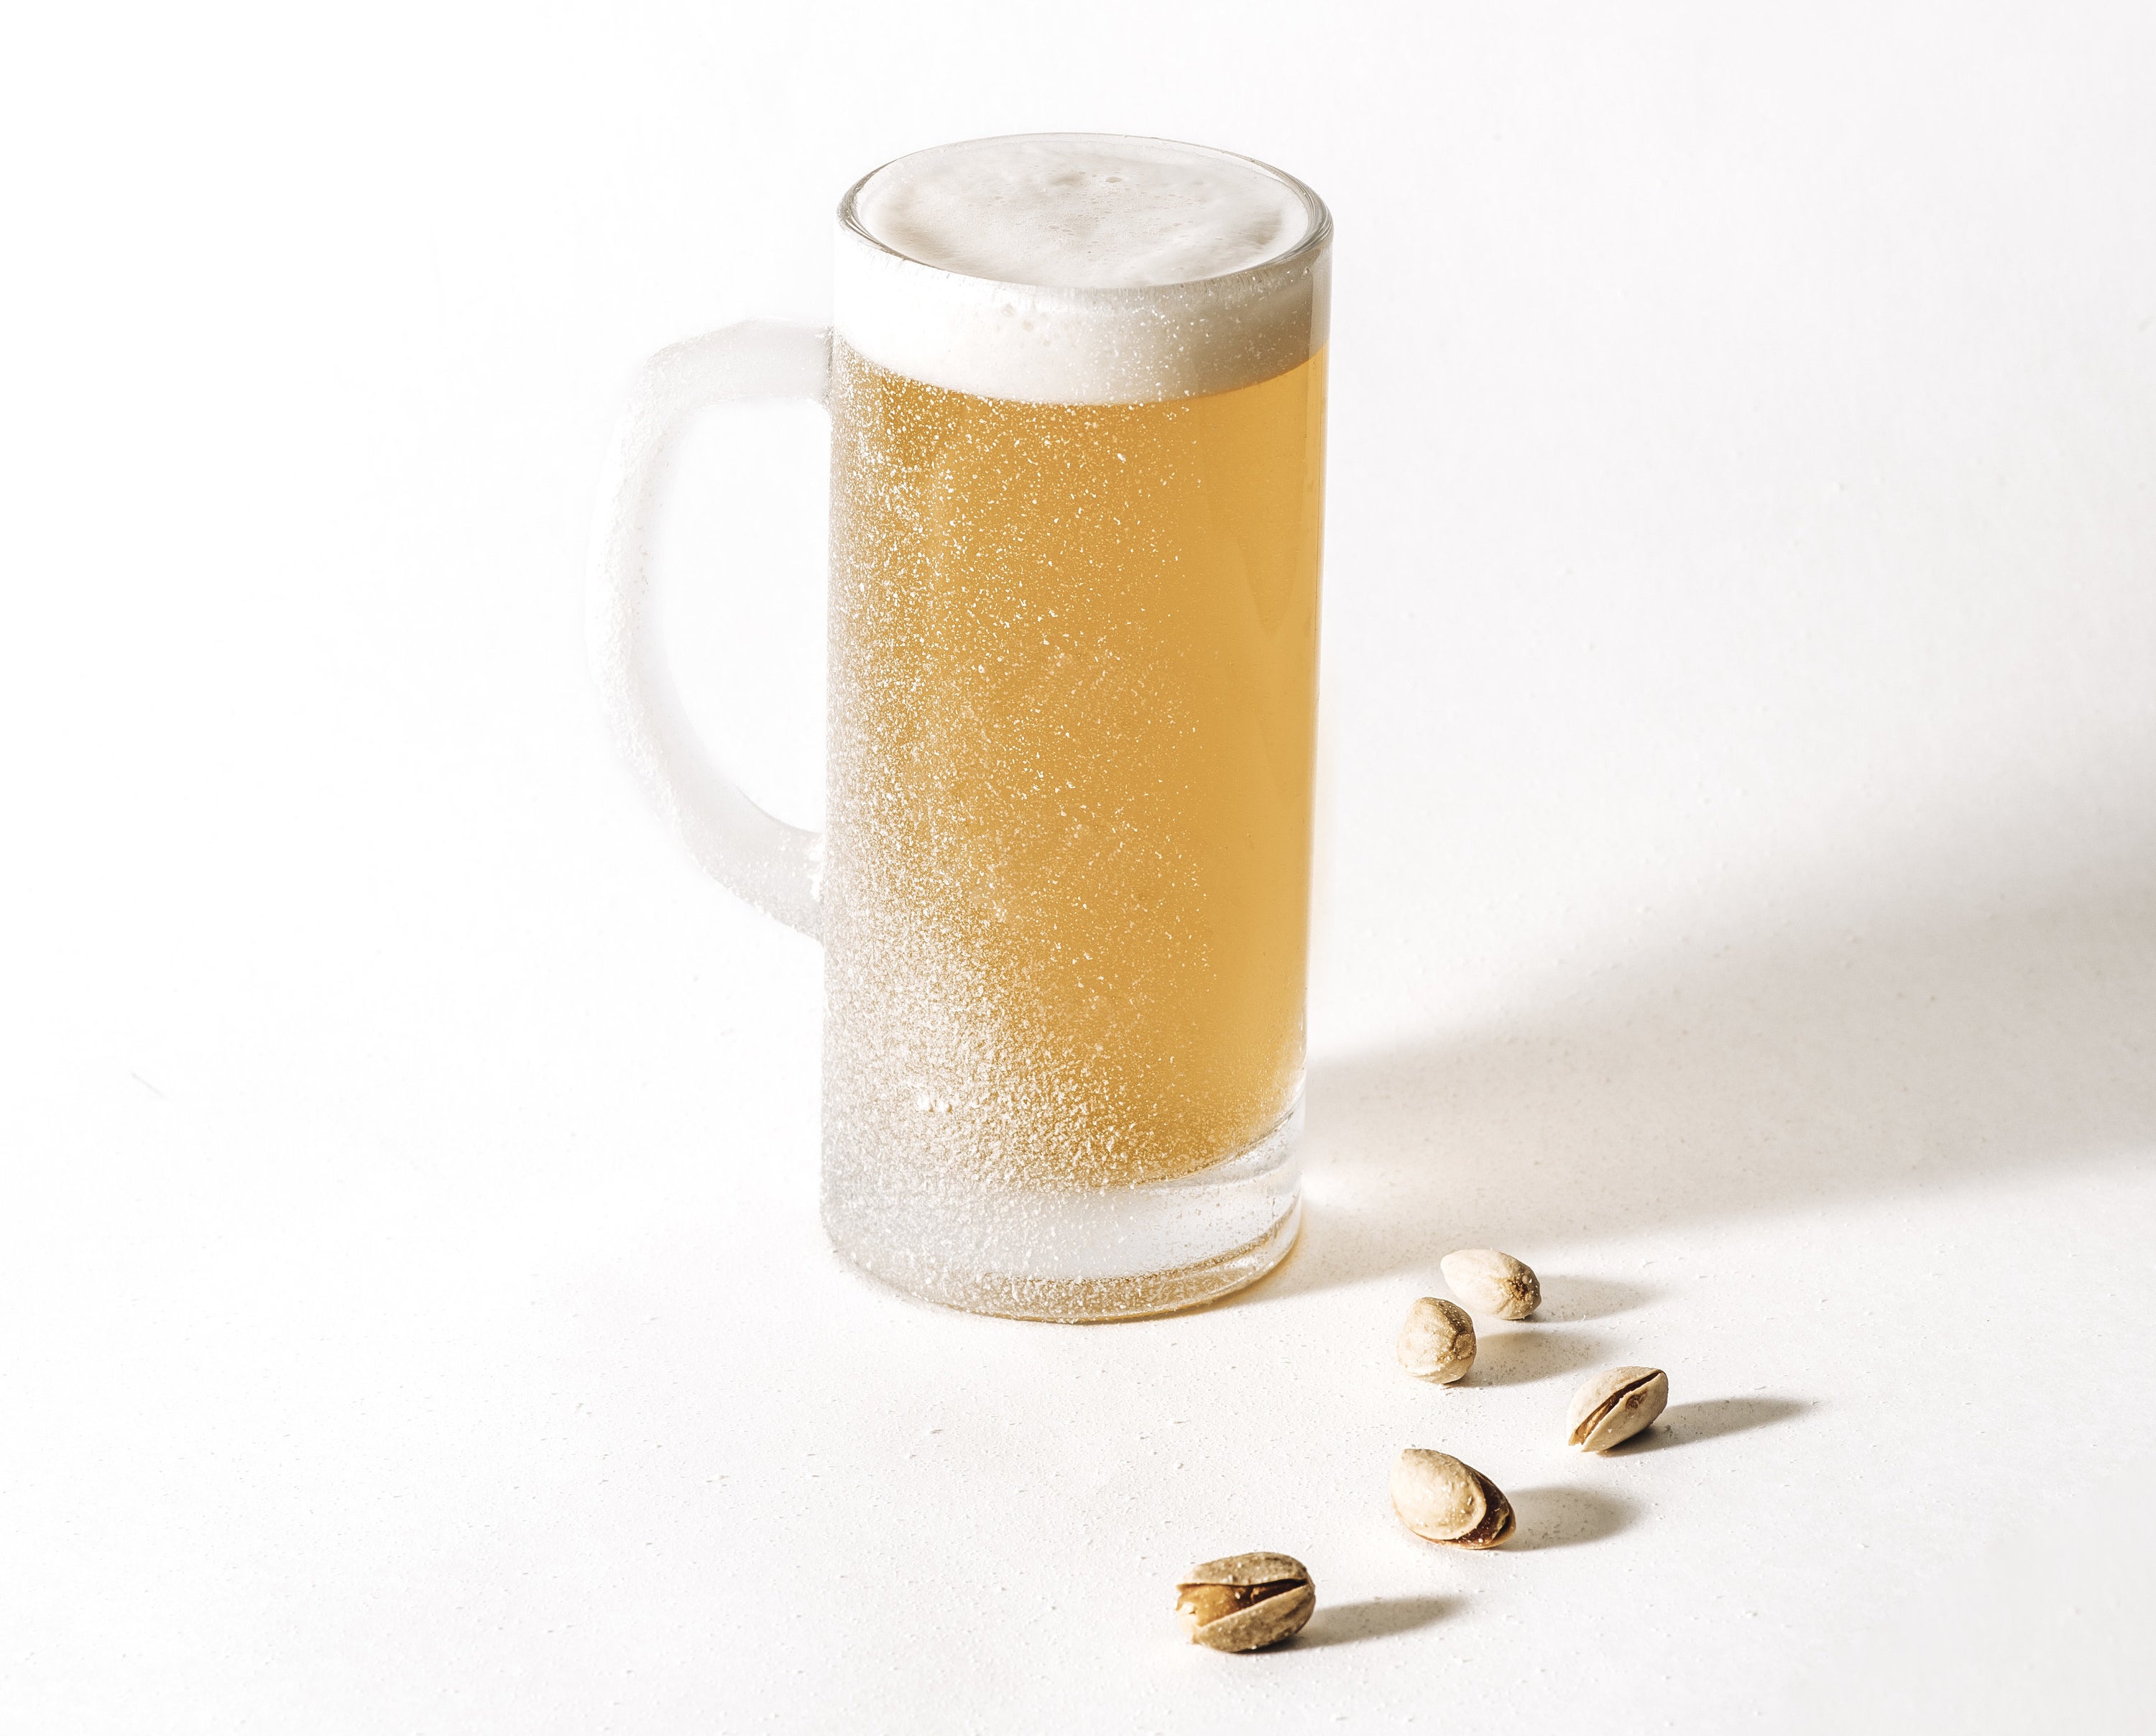 mug of beer with loose peanuts nearby